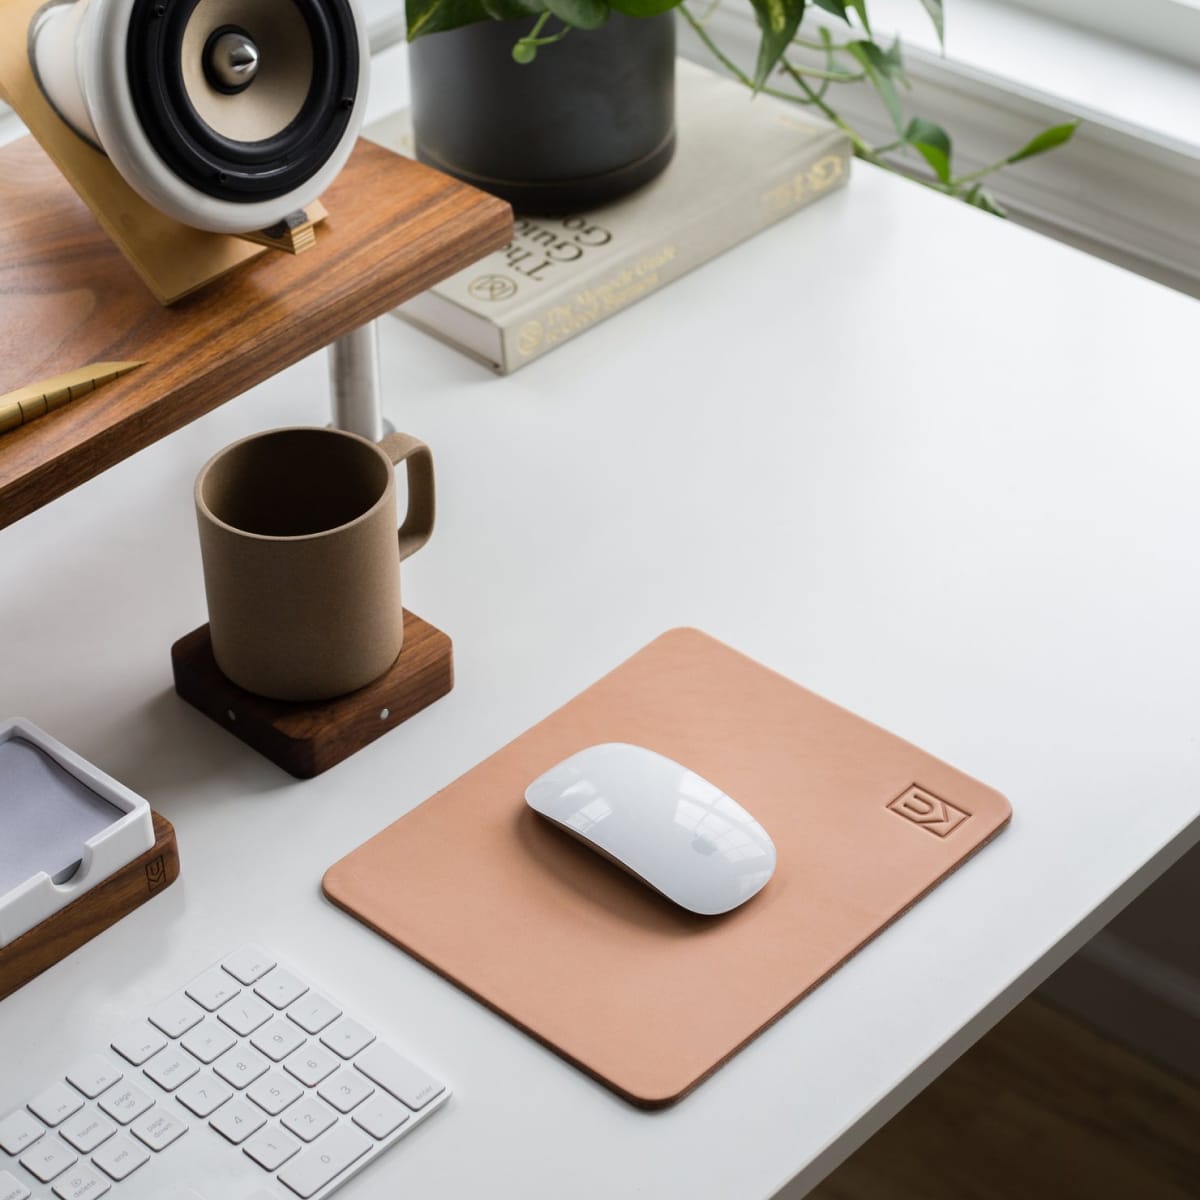 Natural leather mouse pad on white desk next to porcelain mug and keyboard.